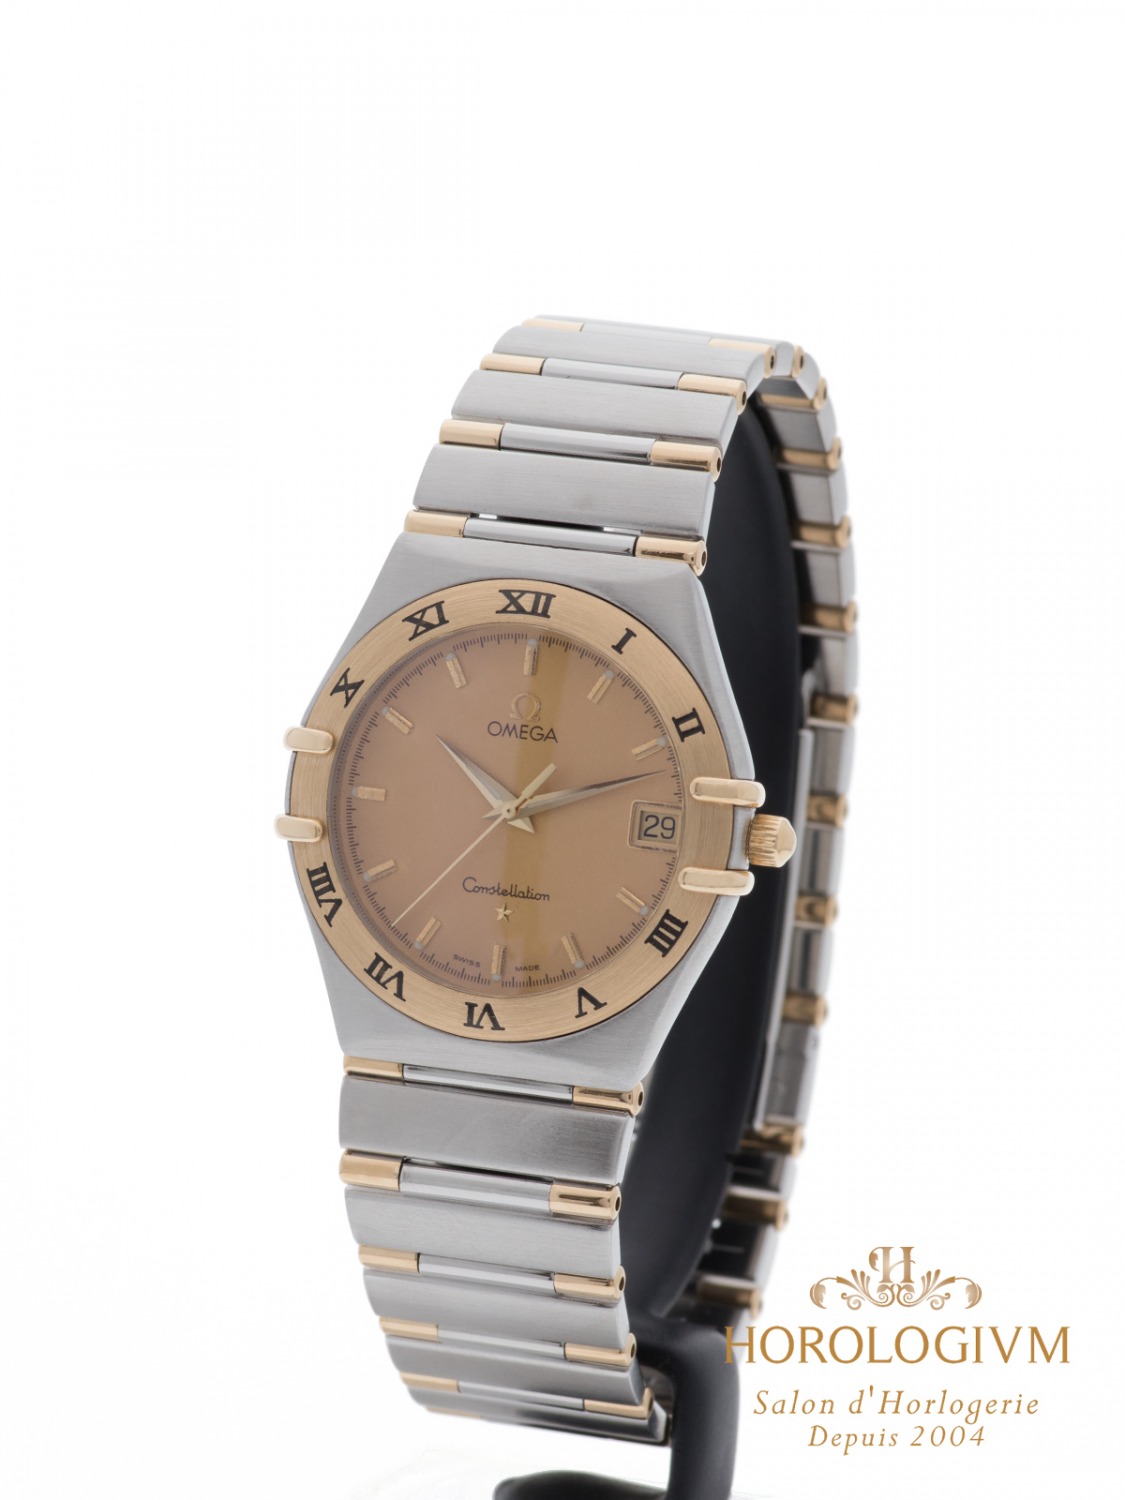 Omega Constellation Two-Tone 33.4MM Ref. 13121000 watch, two - tone (bi - colored) silver (case) and yellow gold (bezel)